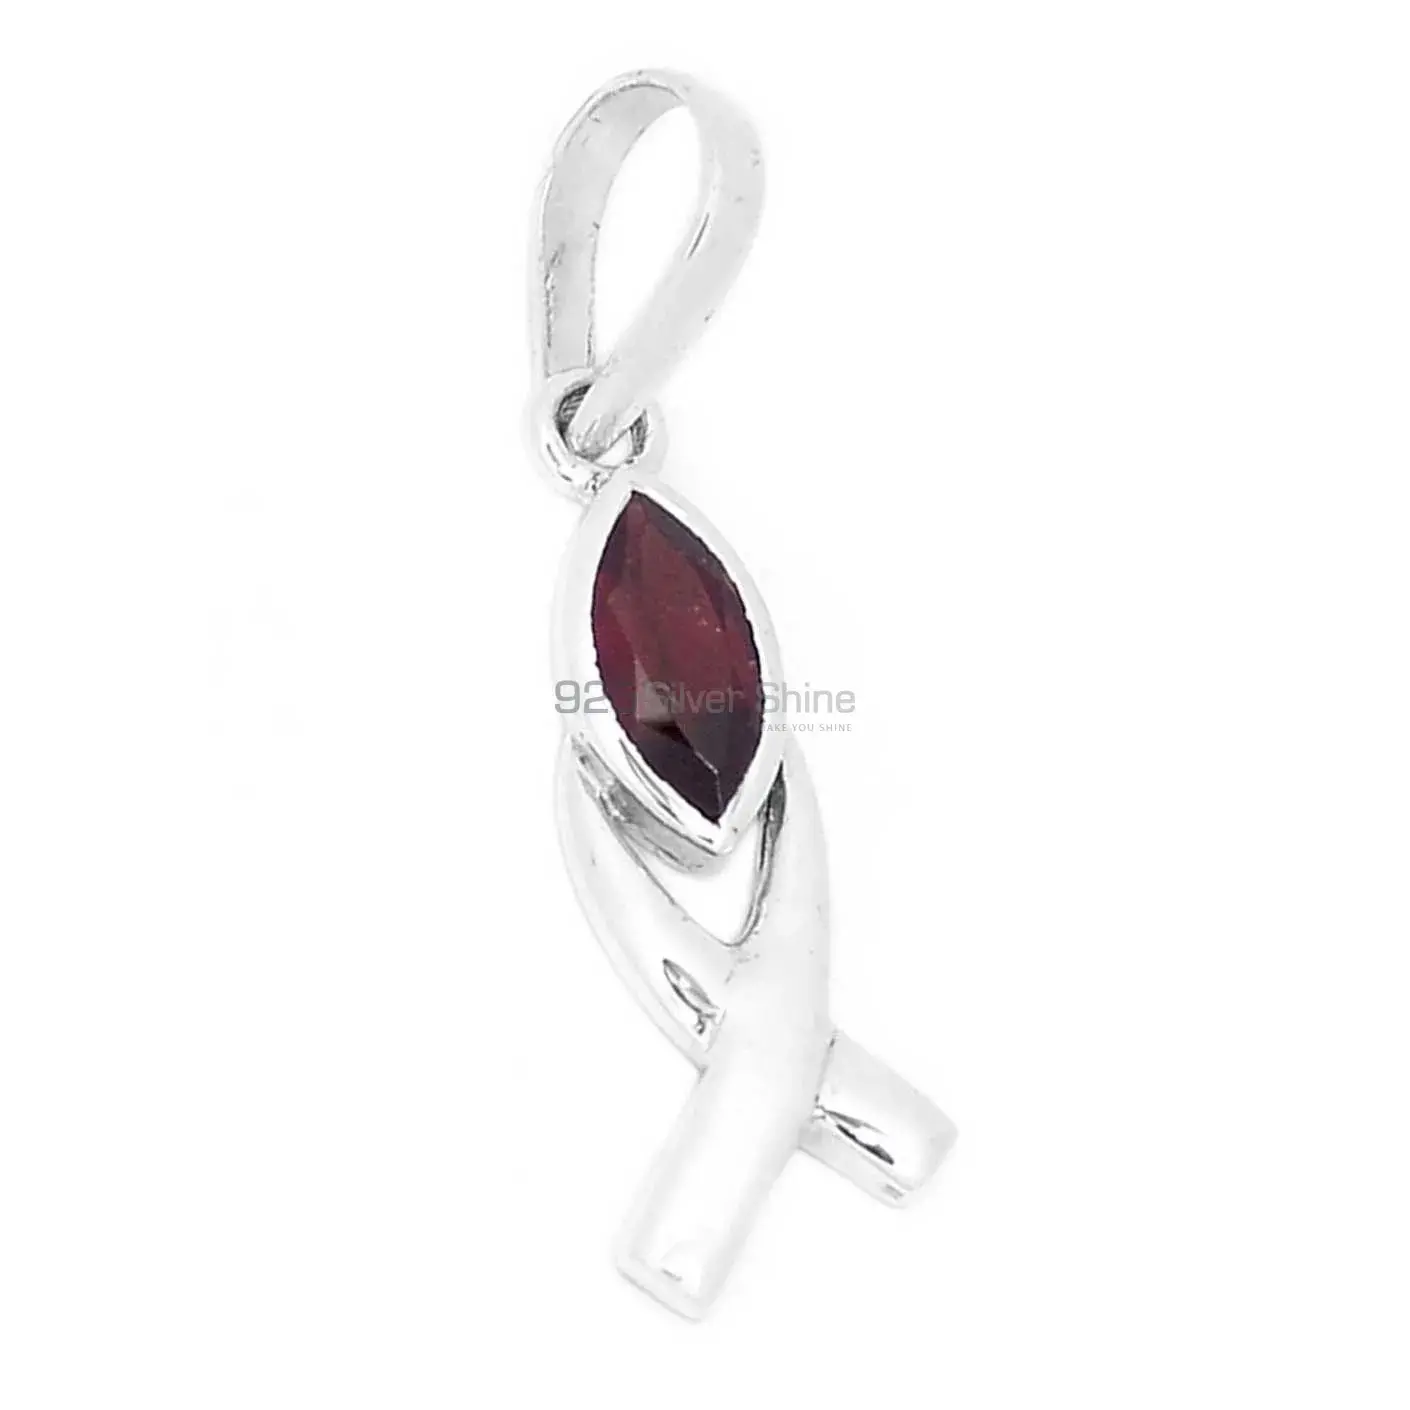 High Quality Garnet Gemstone Pendants Exporters In 925 Solid Silver Jewelry 925SP283-3_1